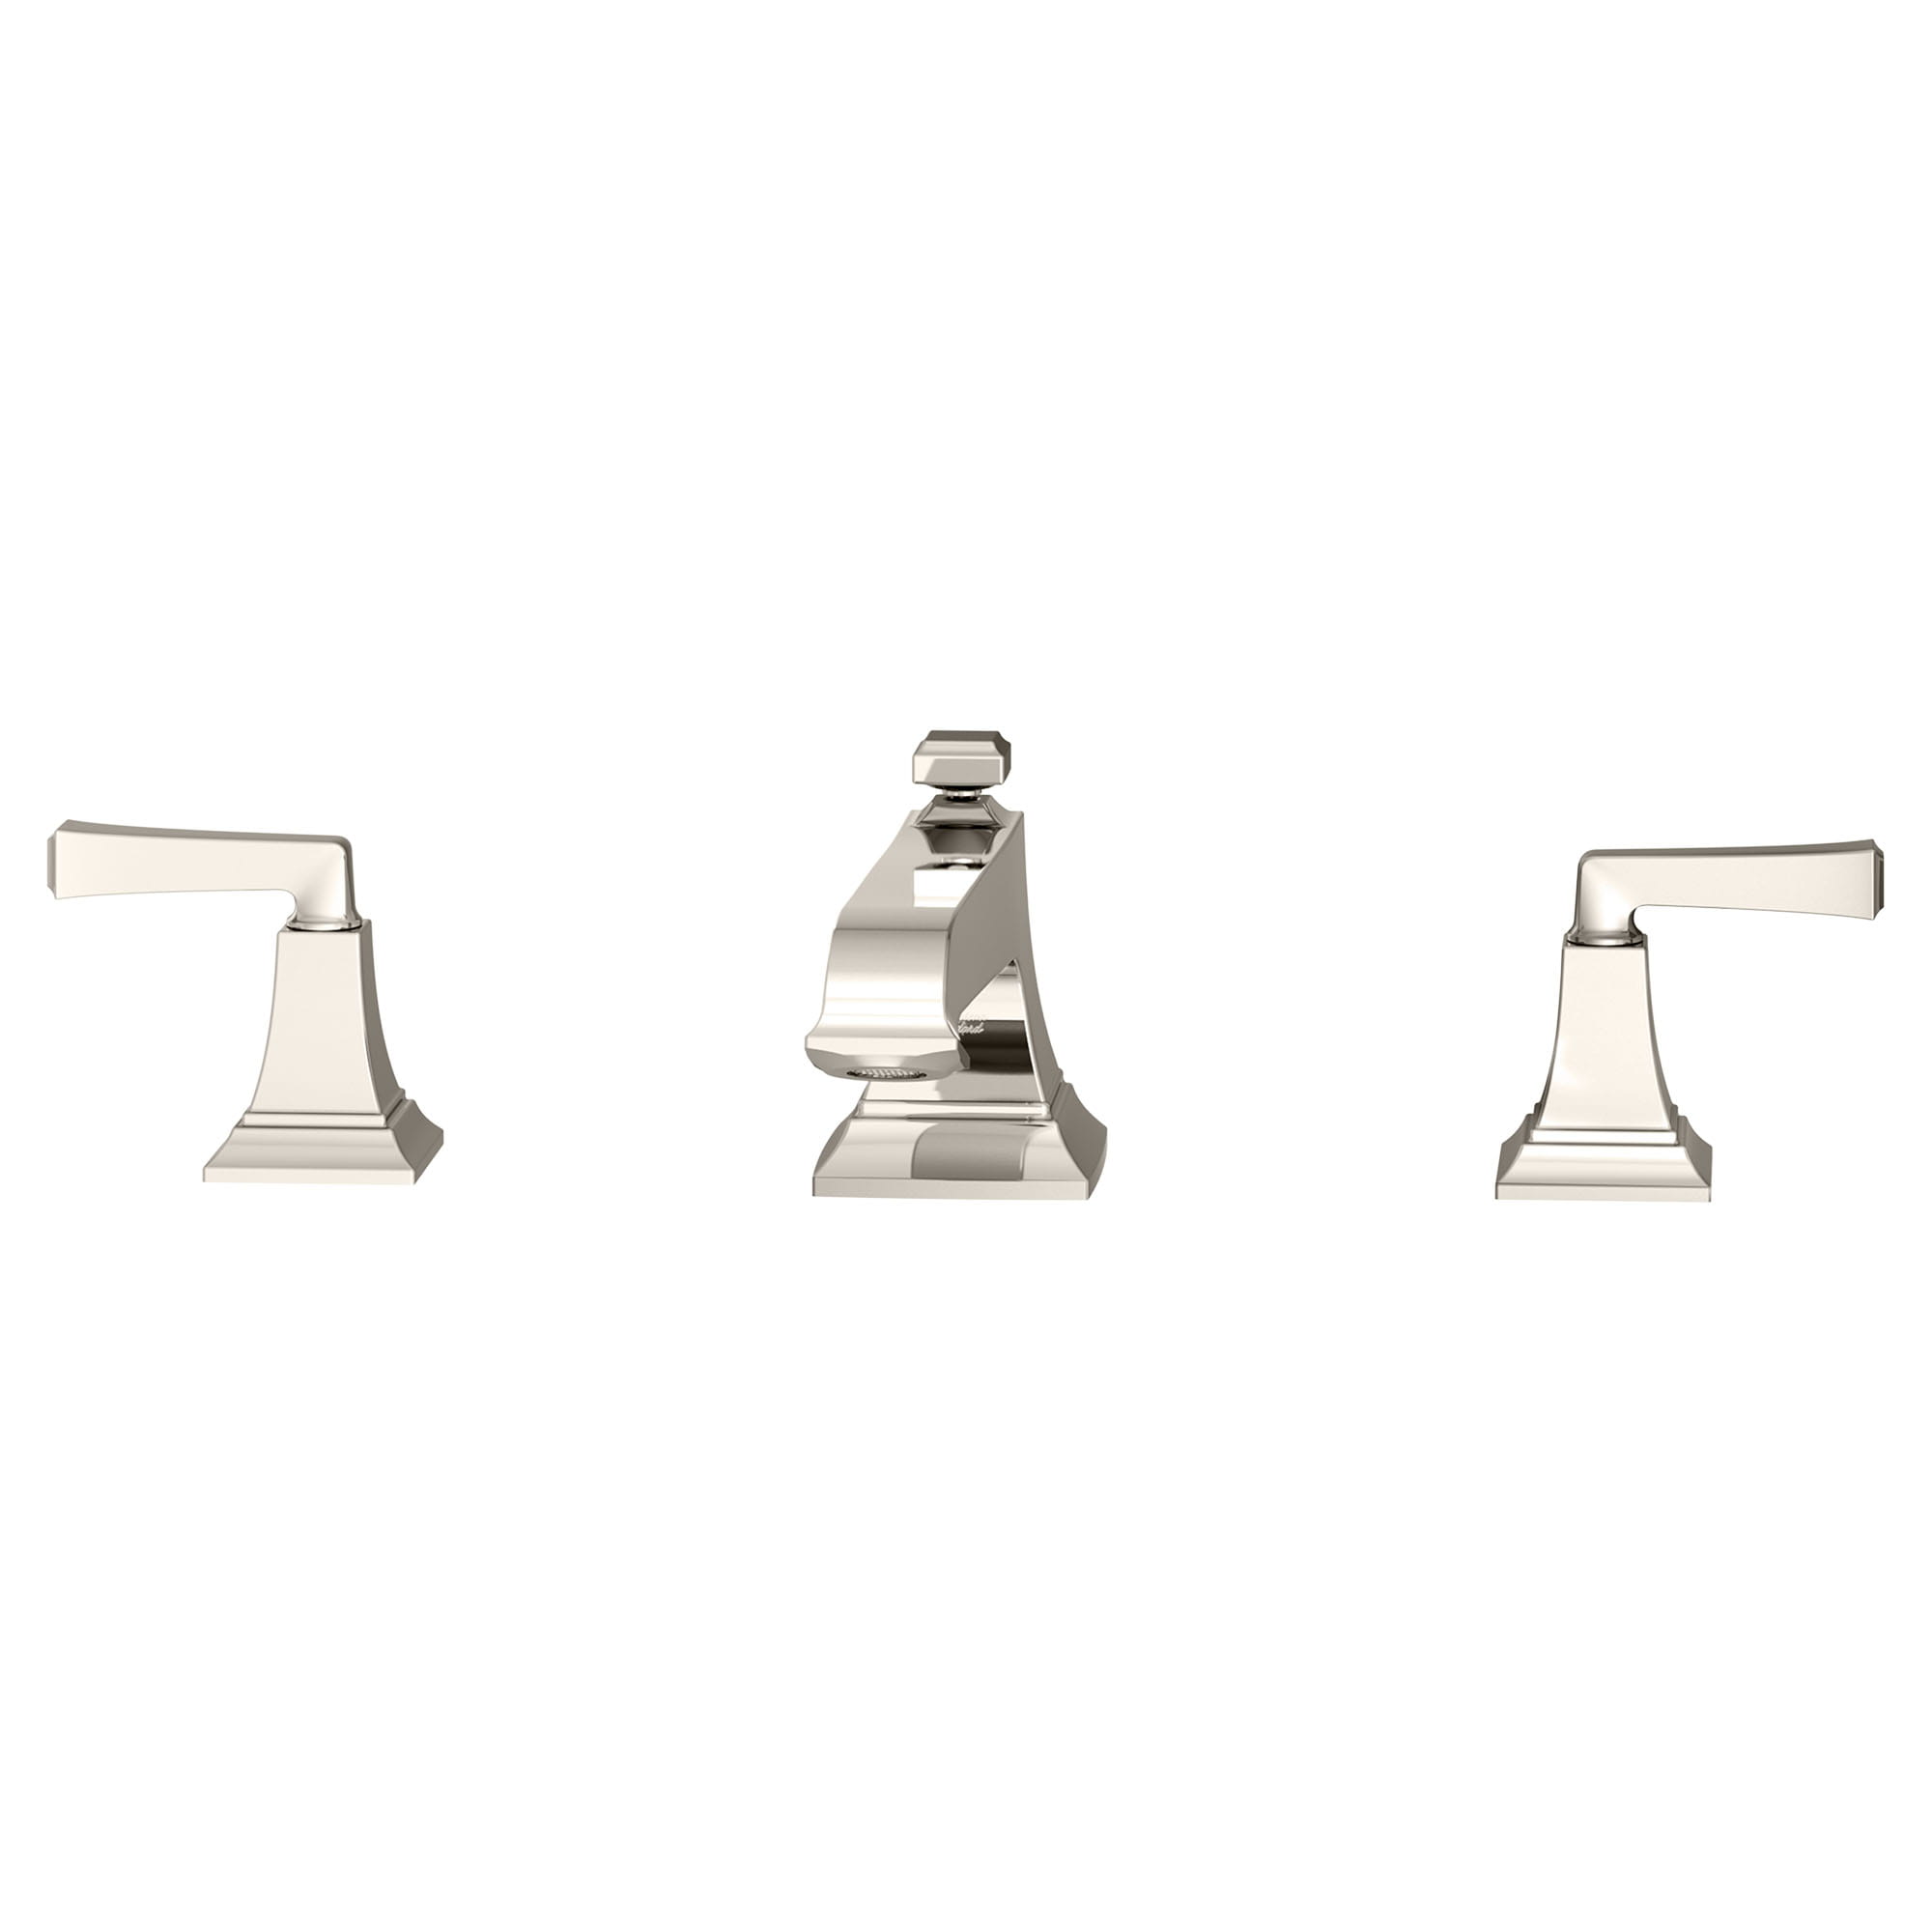 Town Square® S Bathub Faucet With Lever Handles for Flash® Rough-In Valve